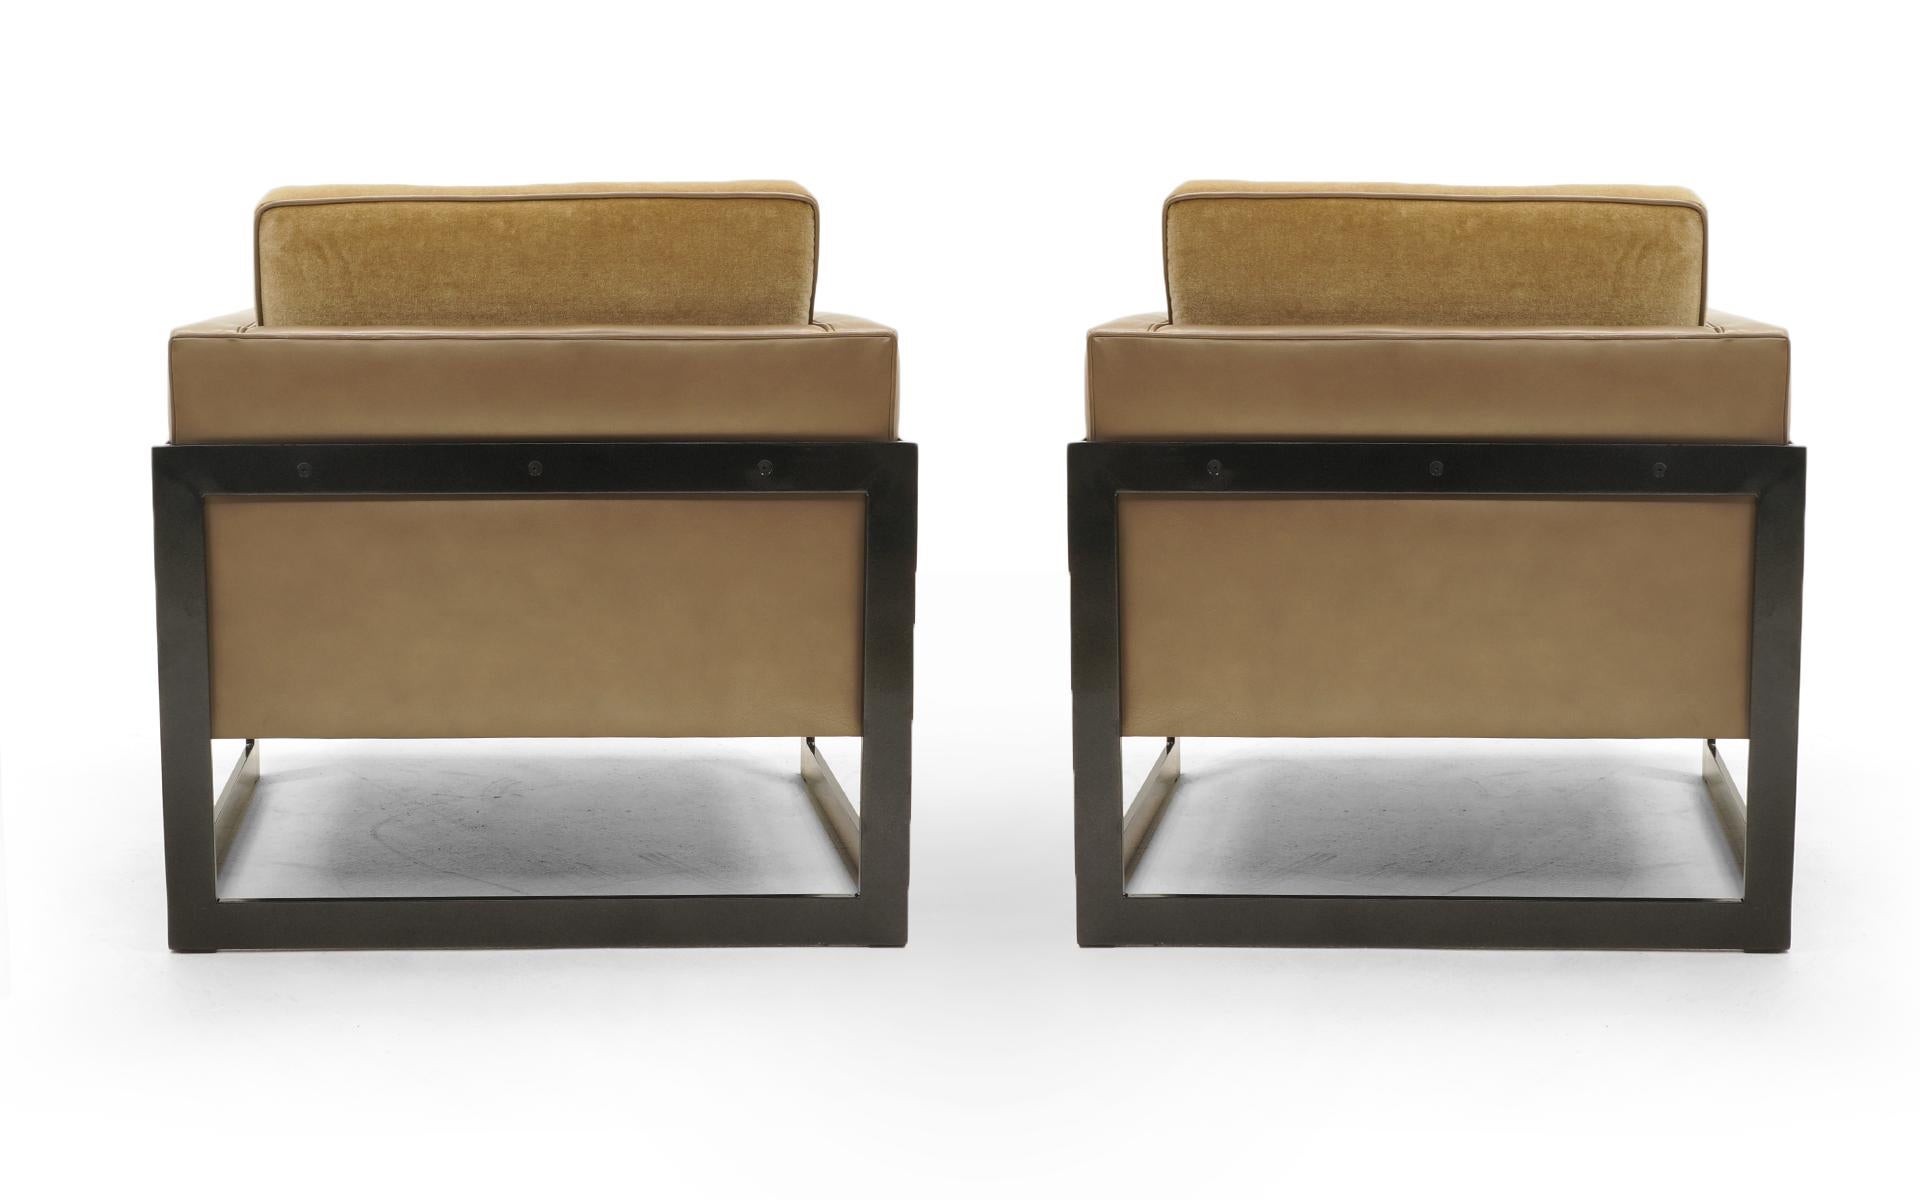 American Pair Lounge Chairs by Milo Baughman, Camel / Tan Mohair and Leather, Beautiful